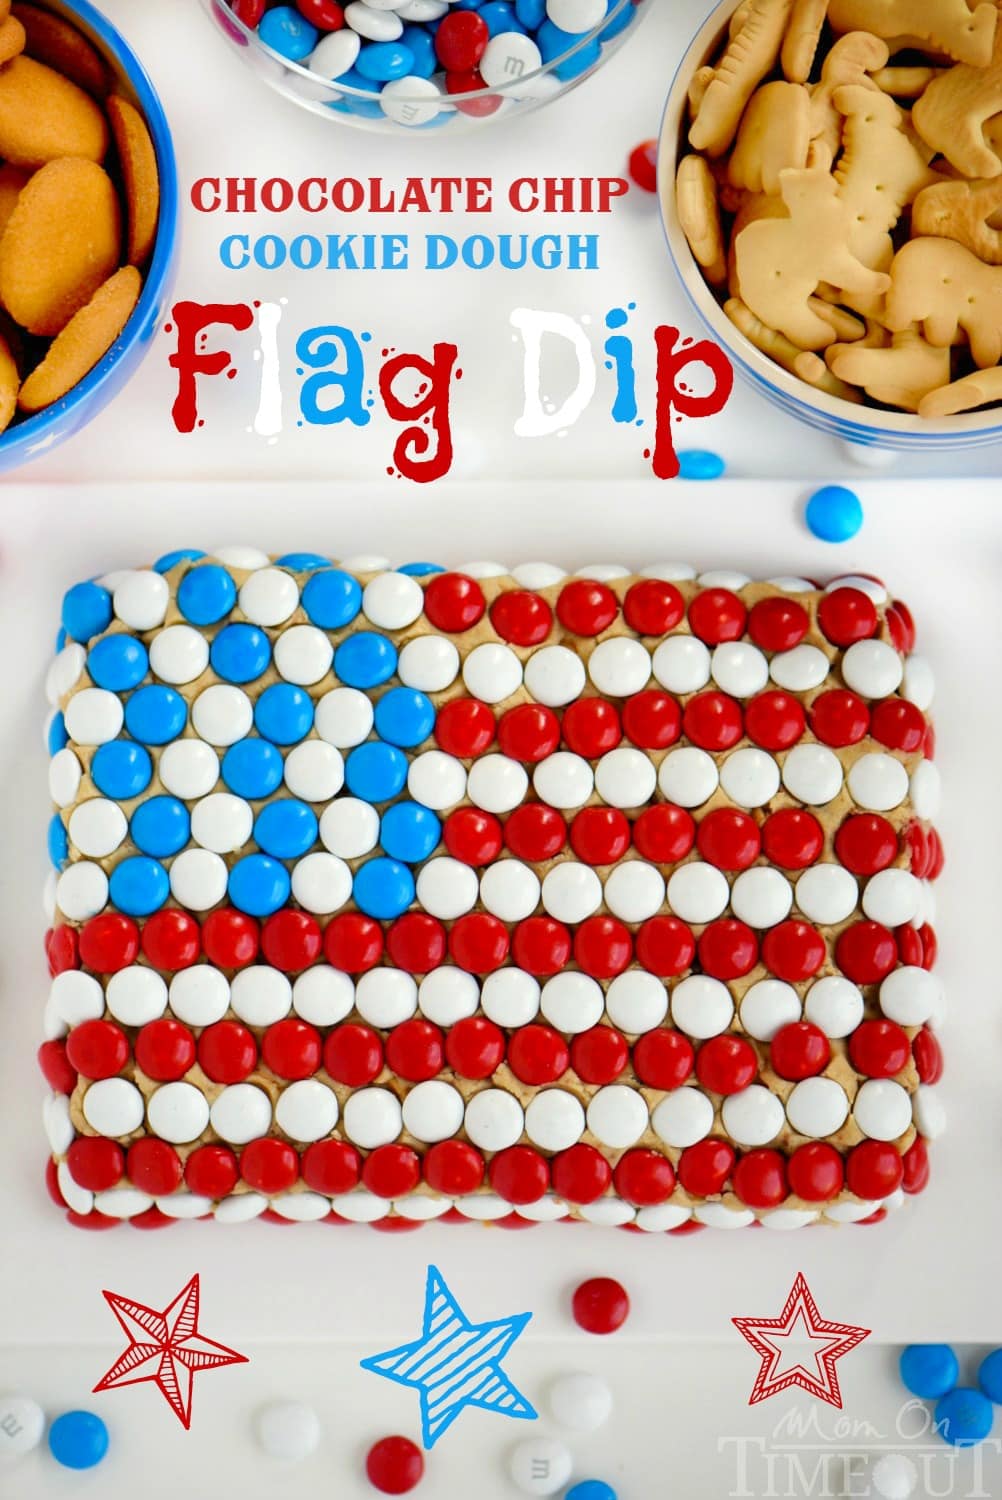 Celebrate with this outrageous Chocolate Chip Cookie Dough Flag Dip this 4th of July weekend! Edible chocolate chip cookie dough is loaded with toffee bits and peanut butter chips for the most delicious dip ever! Decorated in red, white, and blue, this easy dessert recipe is perfect for Memorial Day and Labor Day weekend as well!